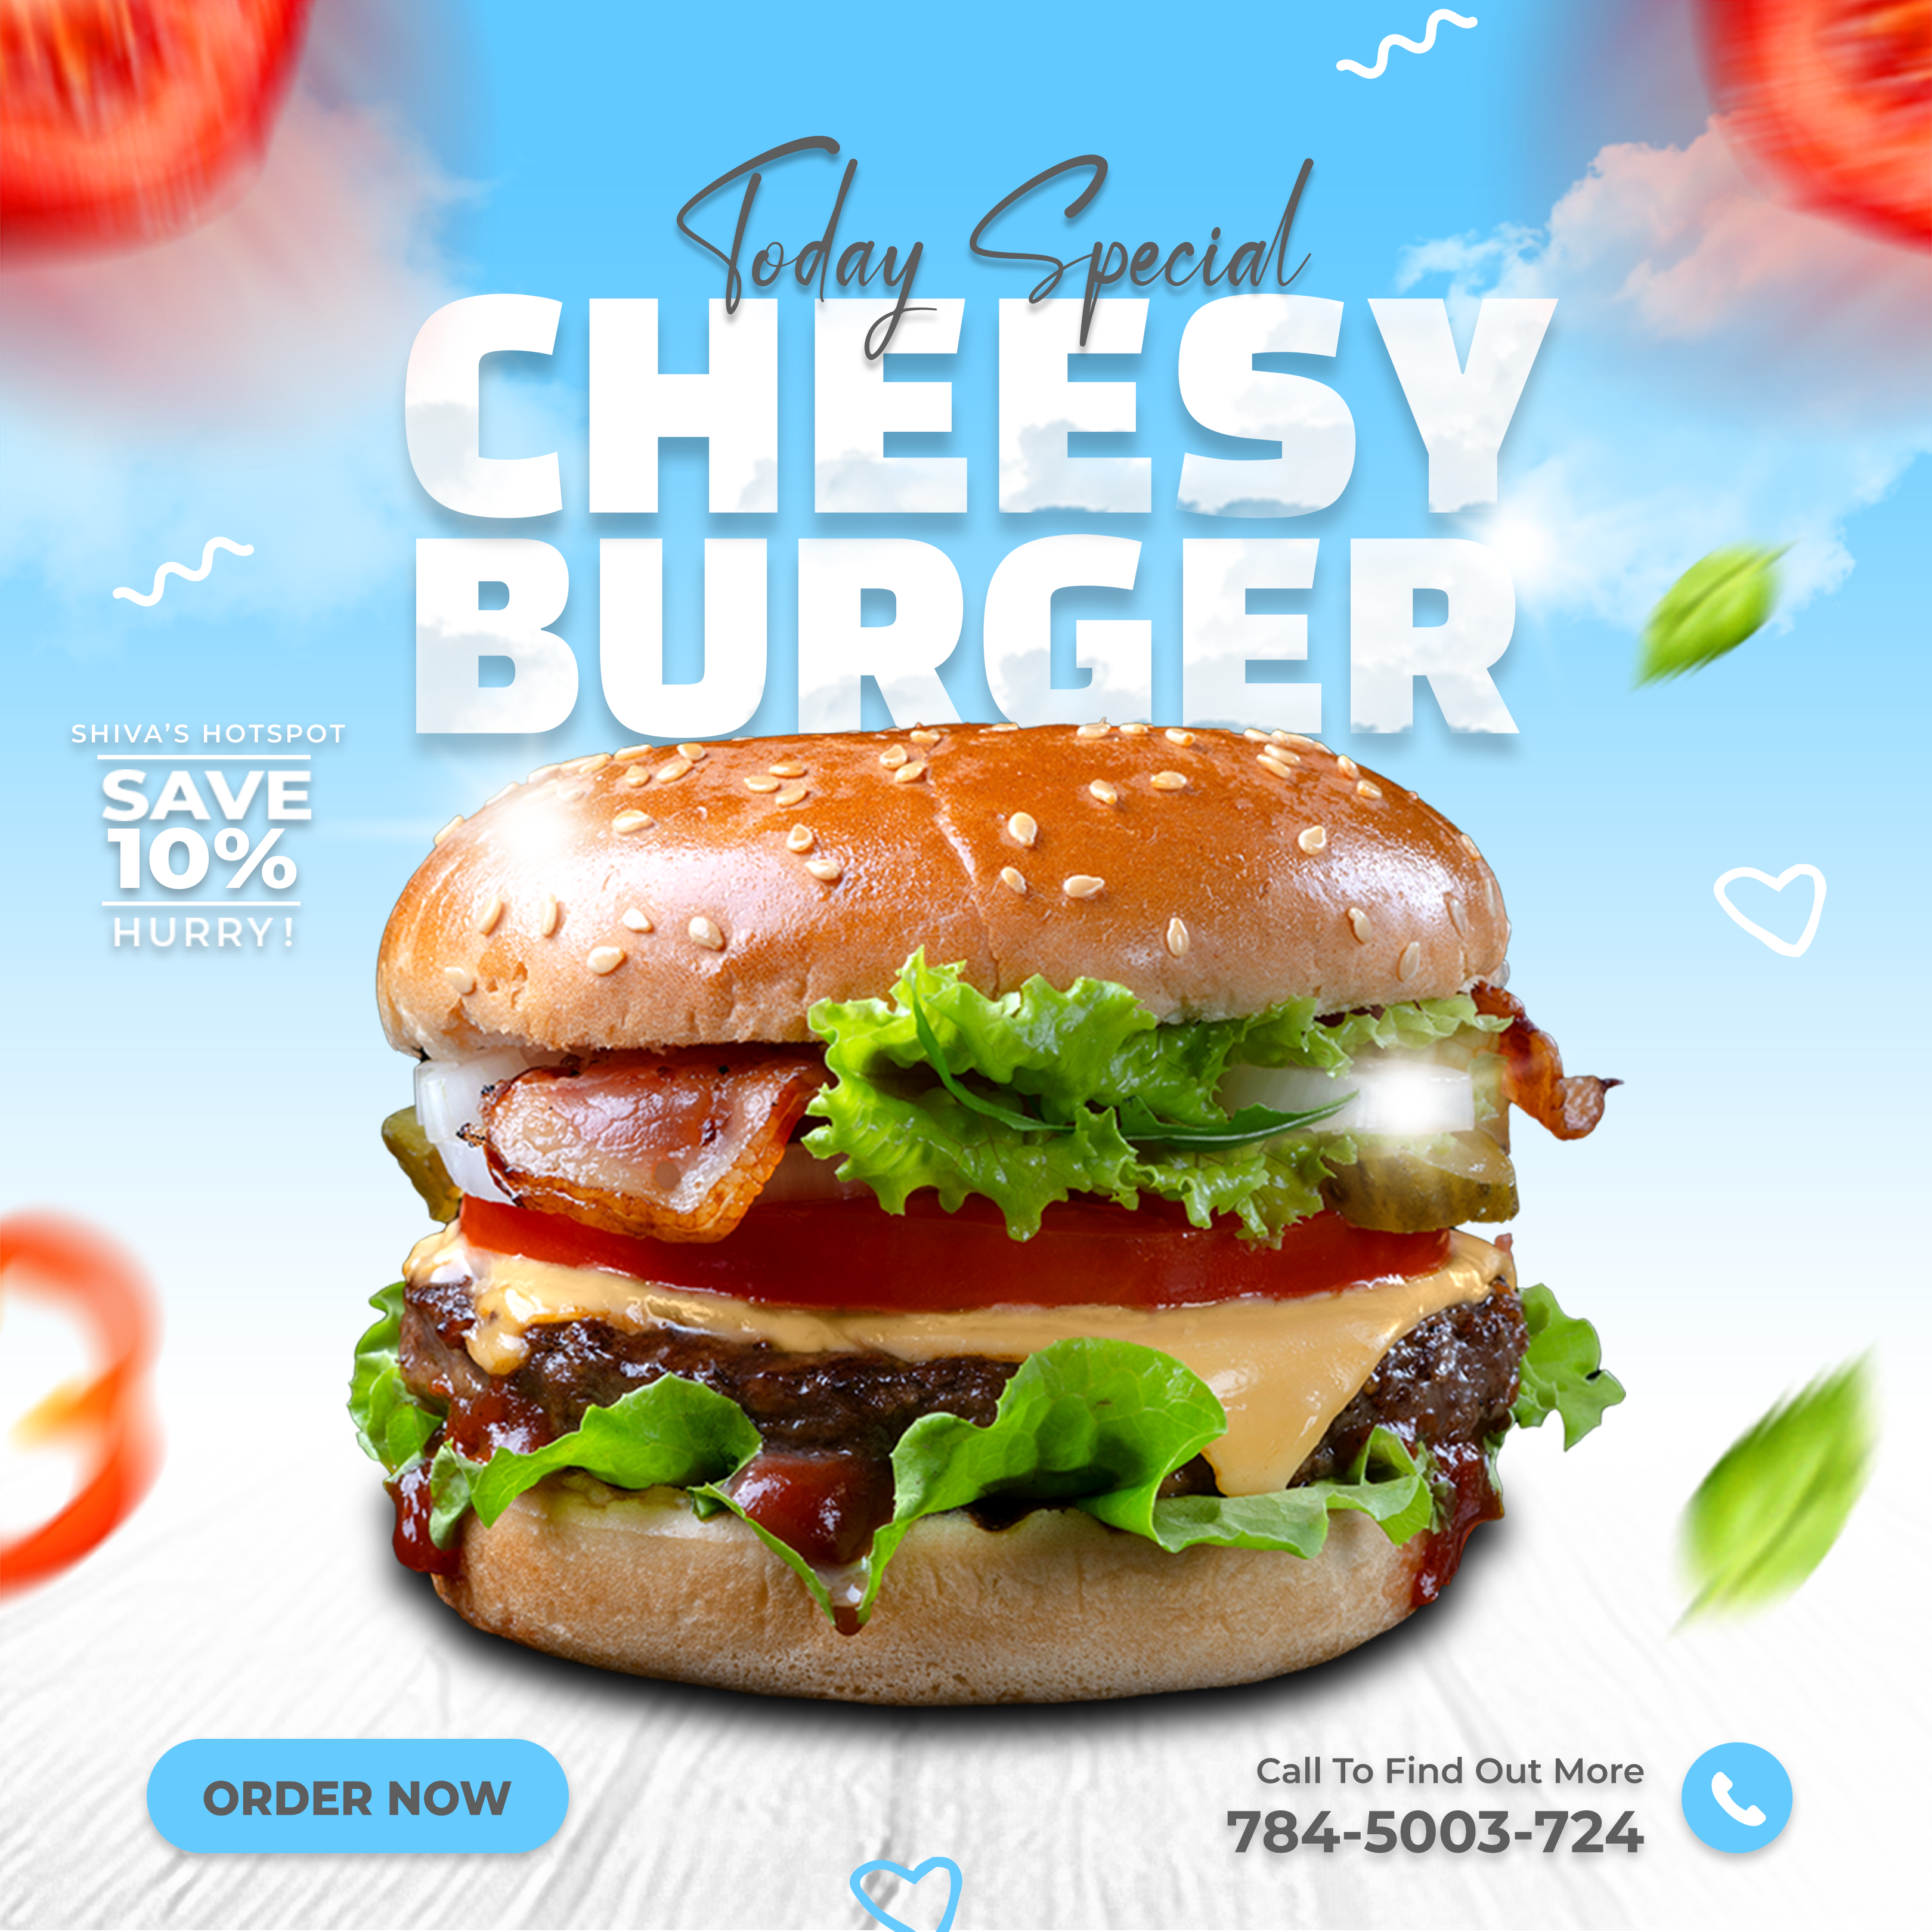 Cheesy Burger: Indulge in Today's Special and Save 10% - Trideify's Tempting Design